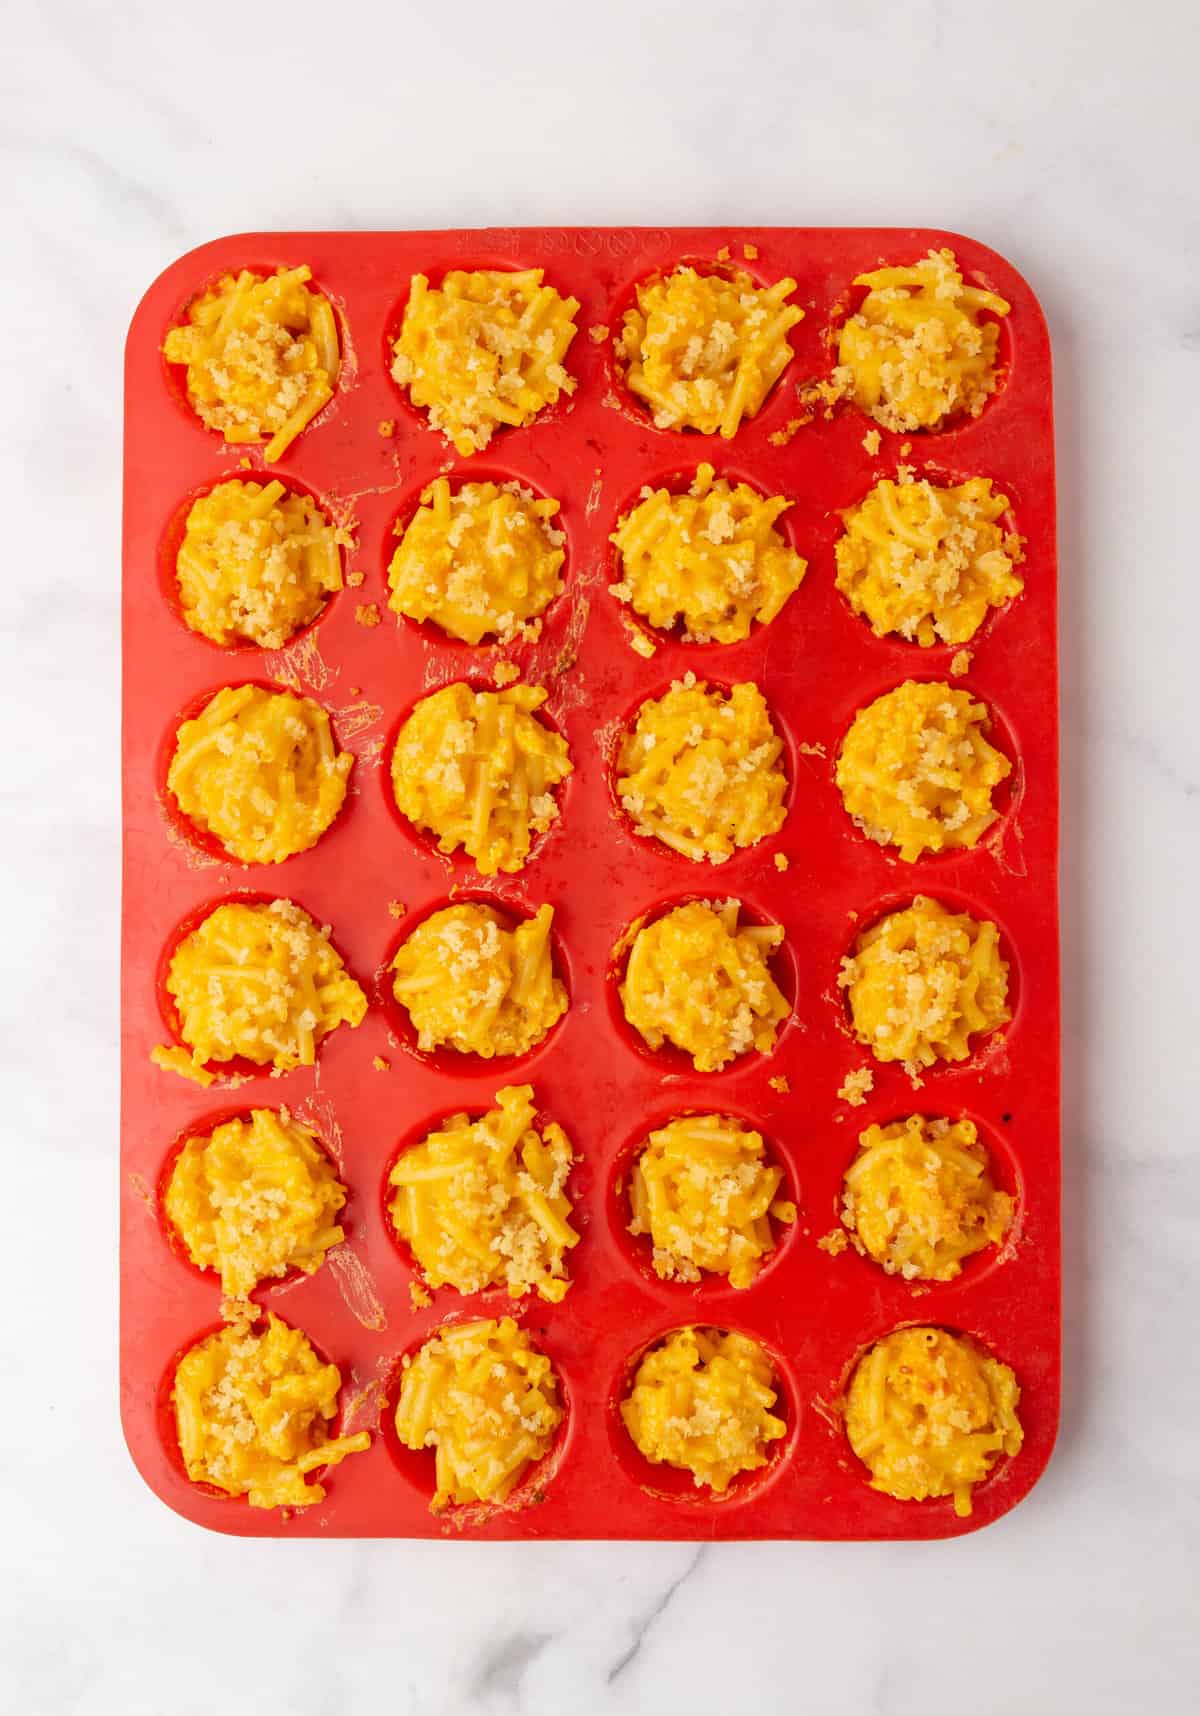 24 mac and cheese bites sitting in a red silicone mold. 